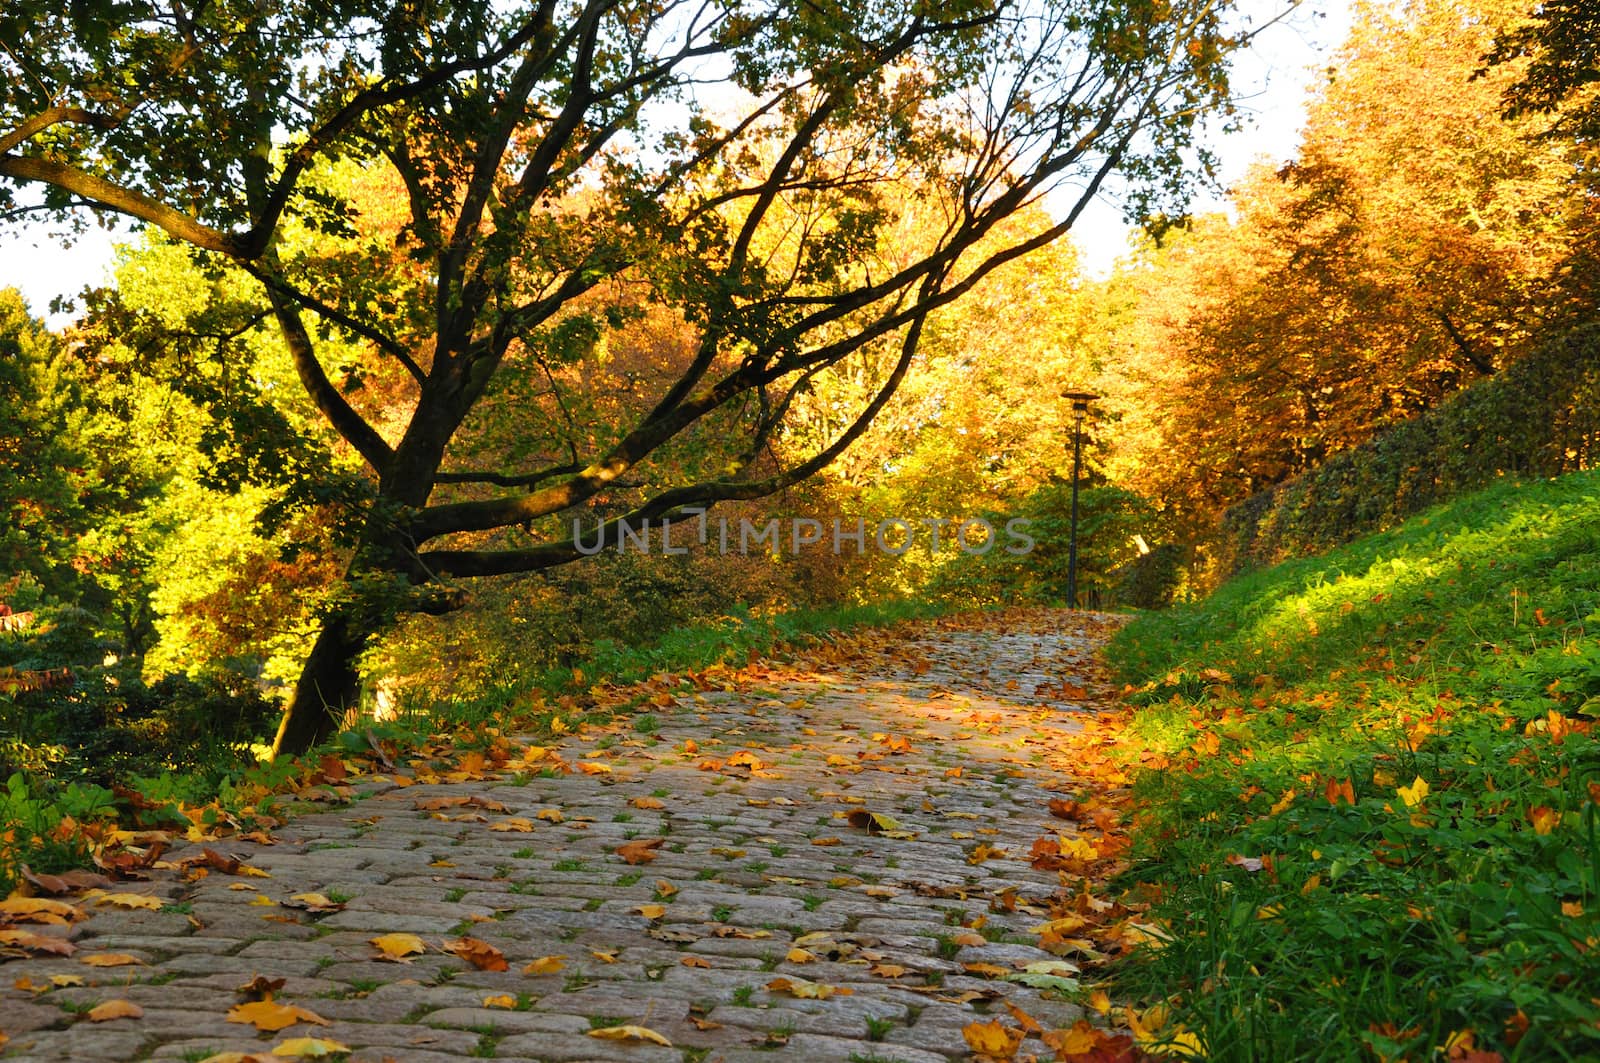 Nice pathway in the city at autumn in Fulda, Hessen, Germany by Eagle2308